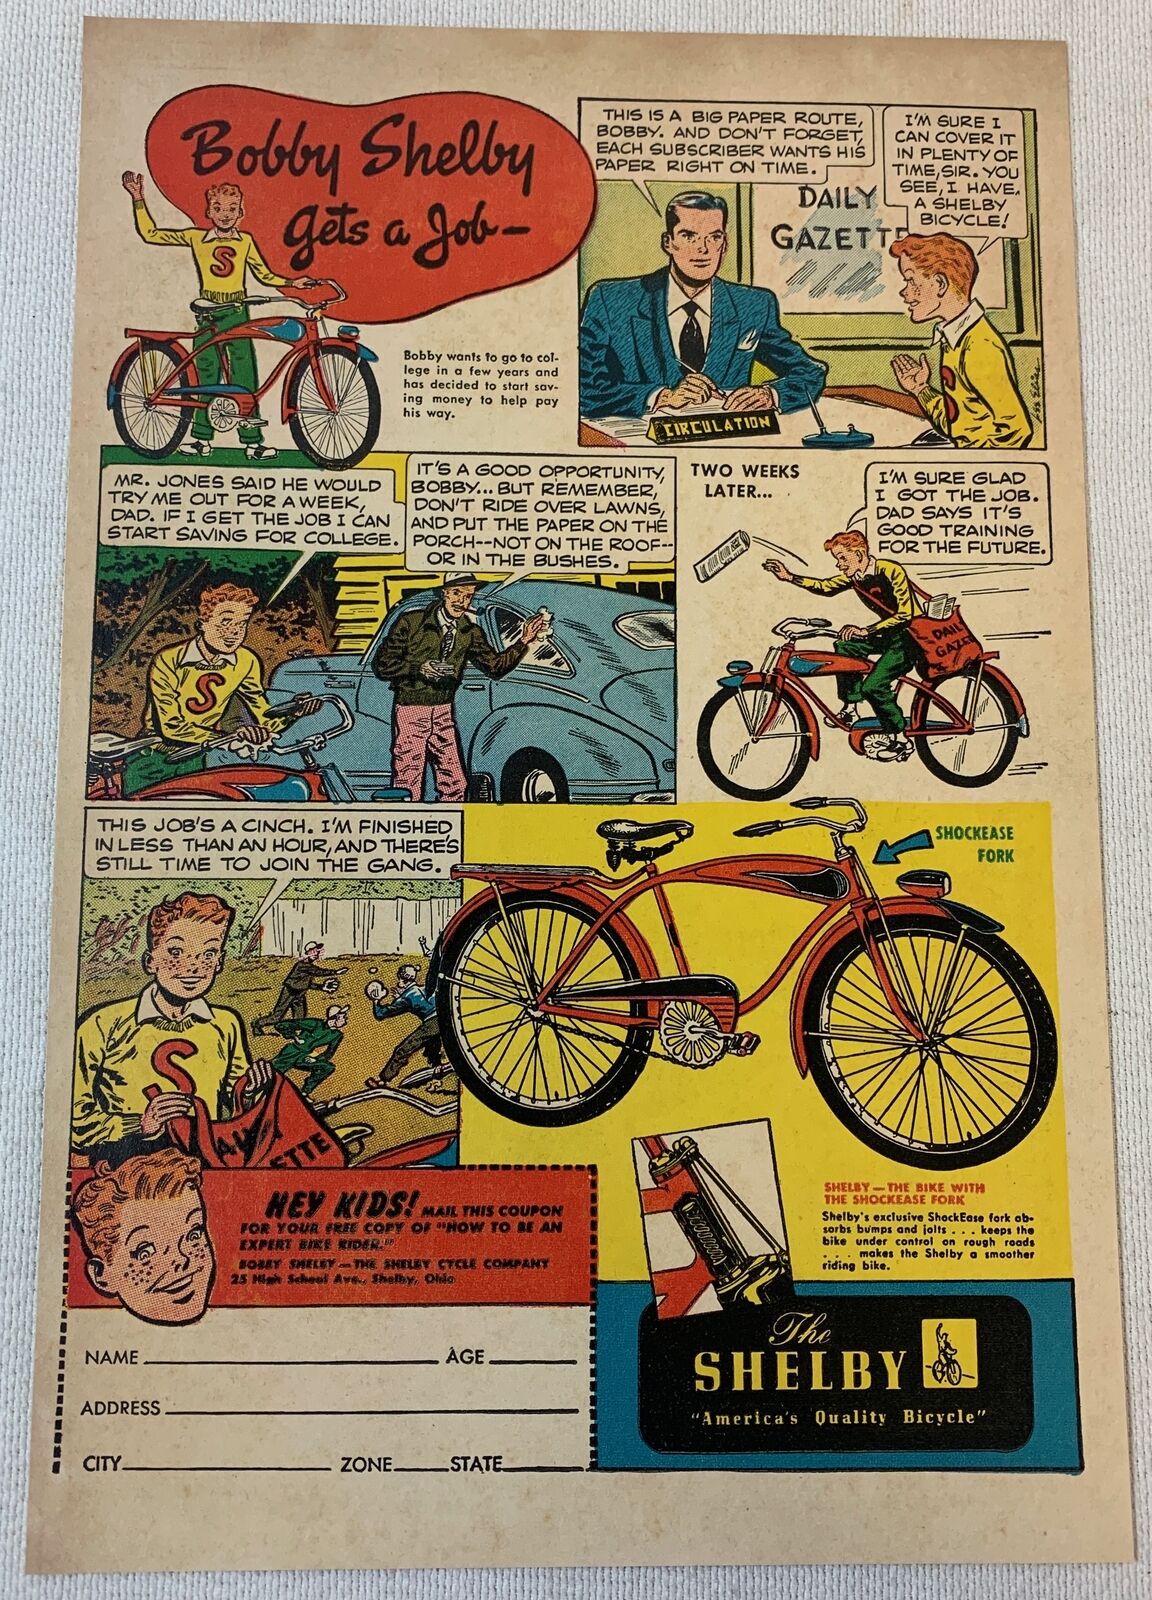 1948 SHELBY bicycle cartoon ad ~ BOBBY SHELBY GETS A JOB newspaper delivery boy